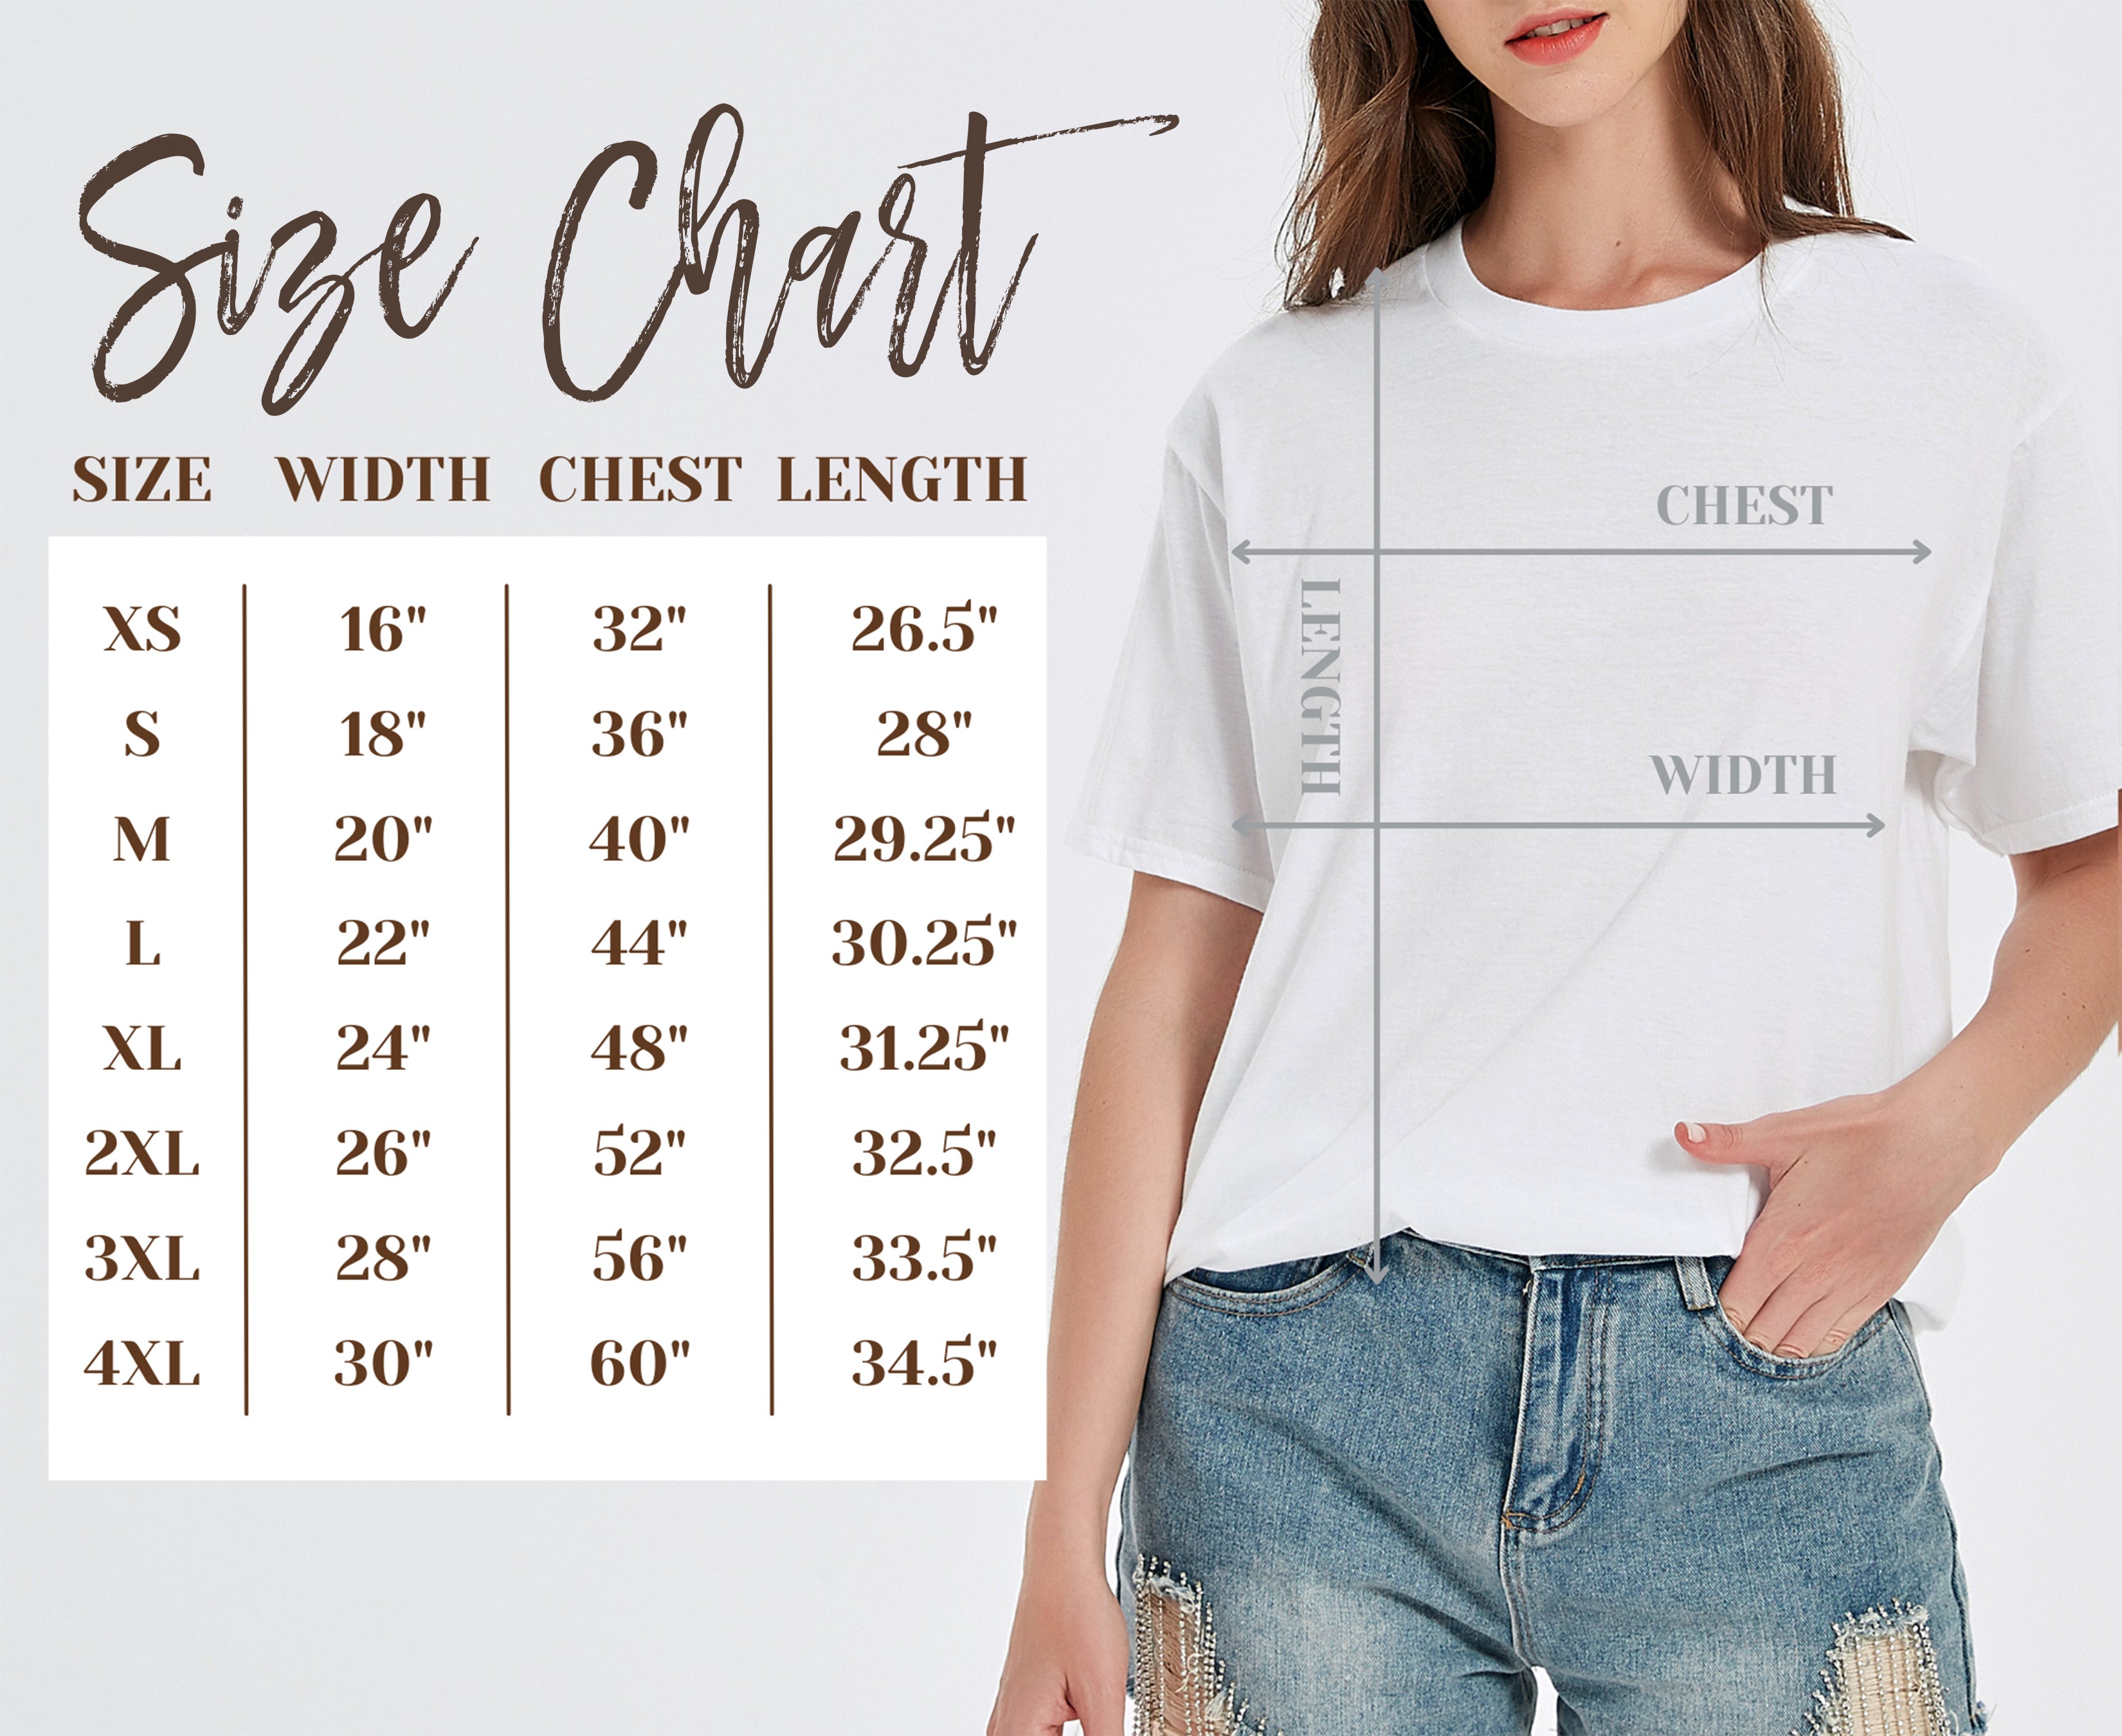 A woman wearing a Back to School Y'all T-Shirt with a size chart, demonstrating school spirit.